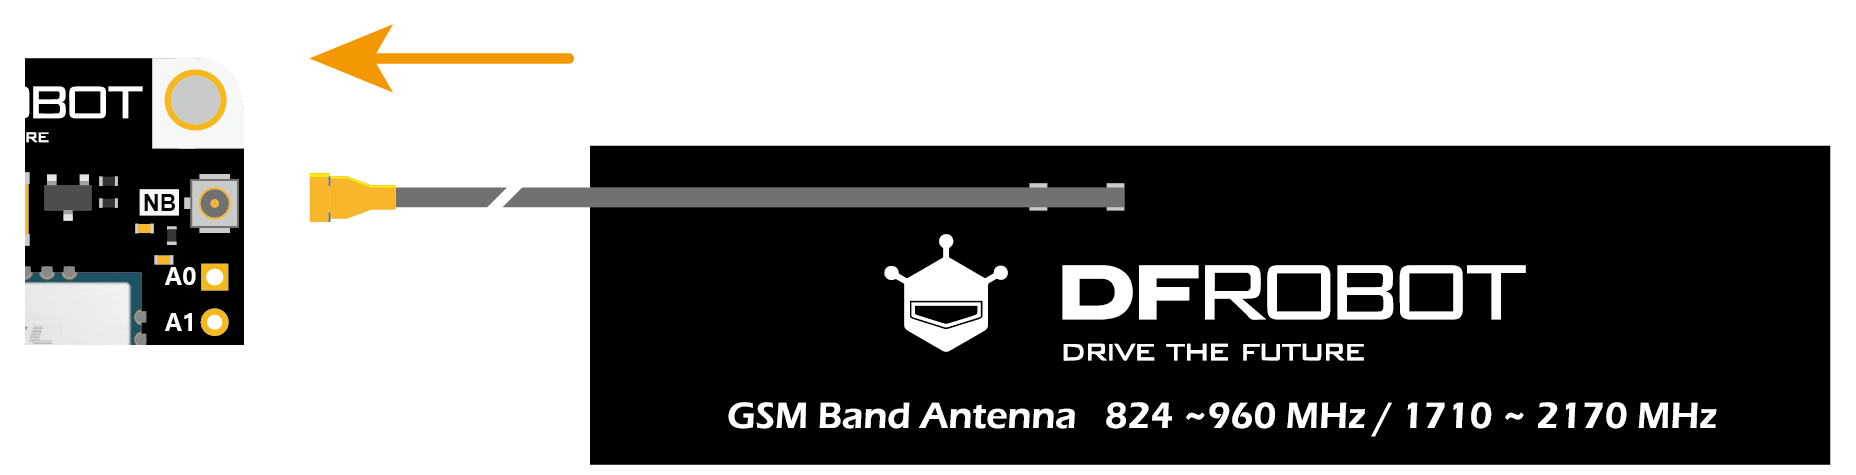 DFR0530_GSM_Ant_connect.png